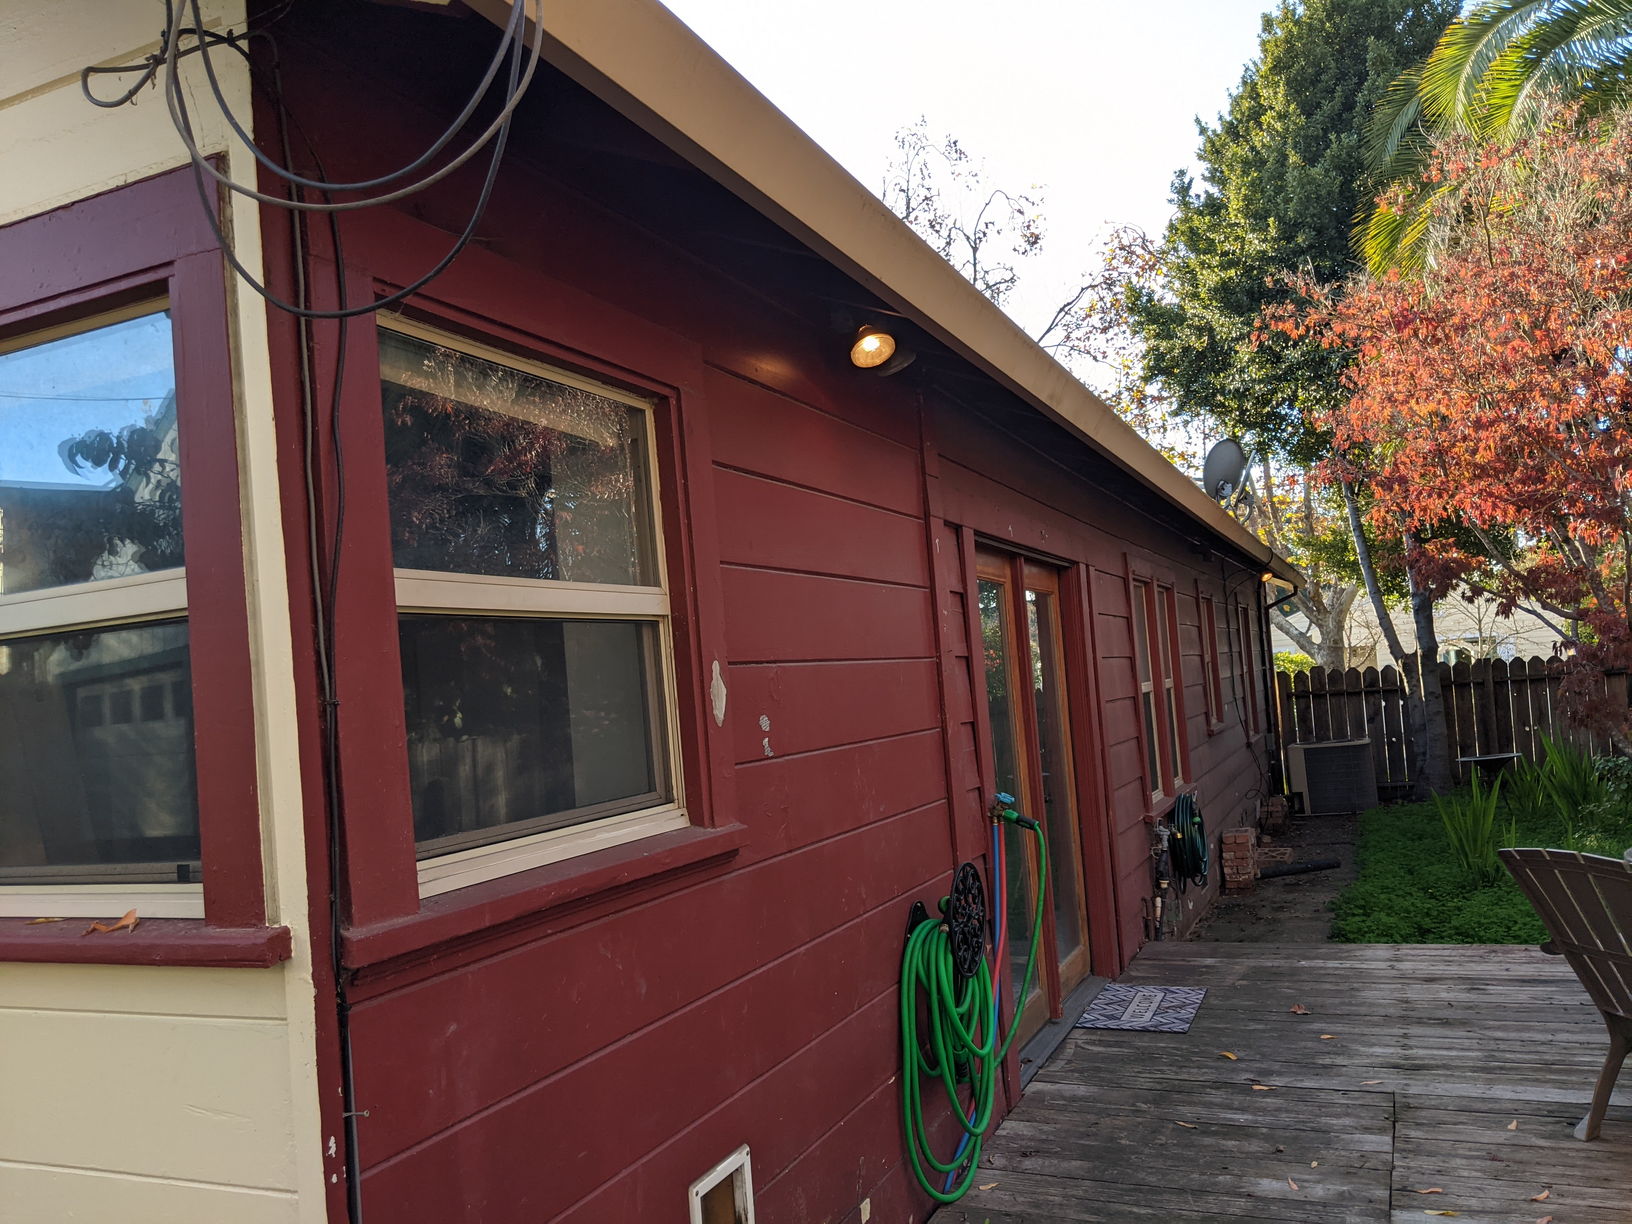 1940s Home in Santa Rosa Before Painting